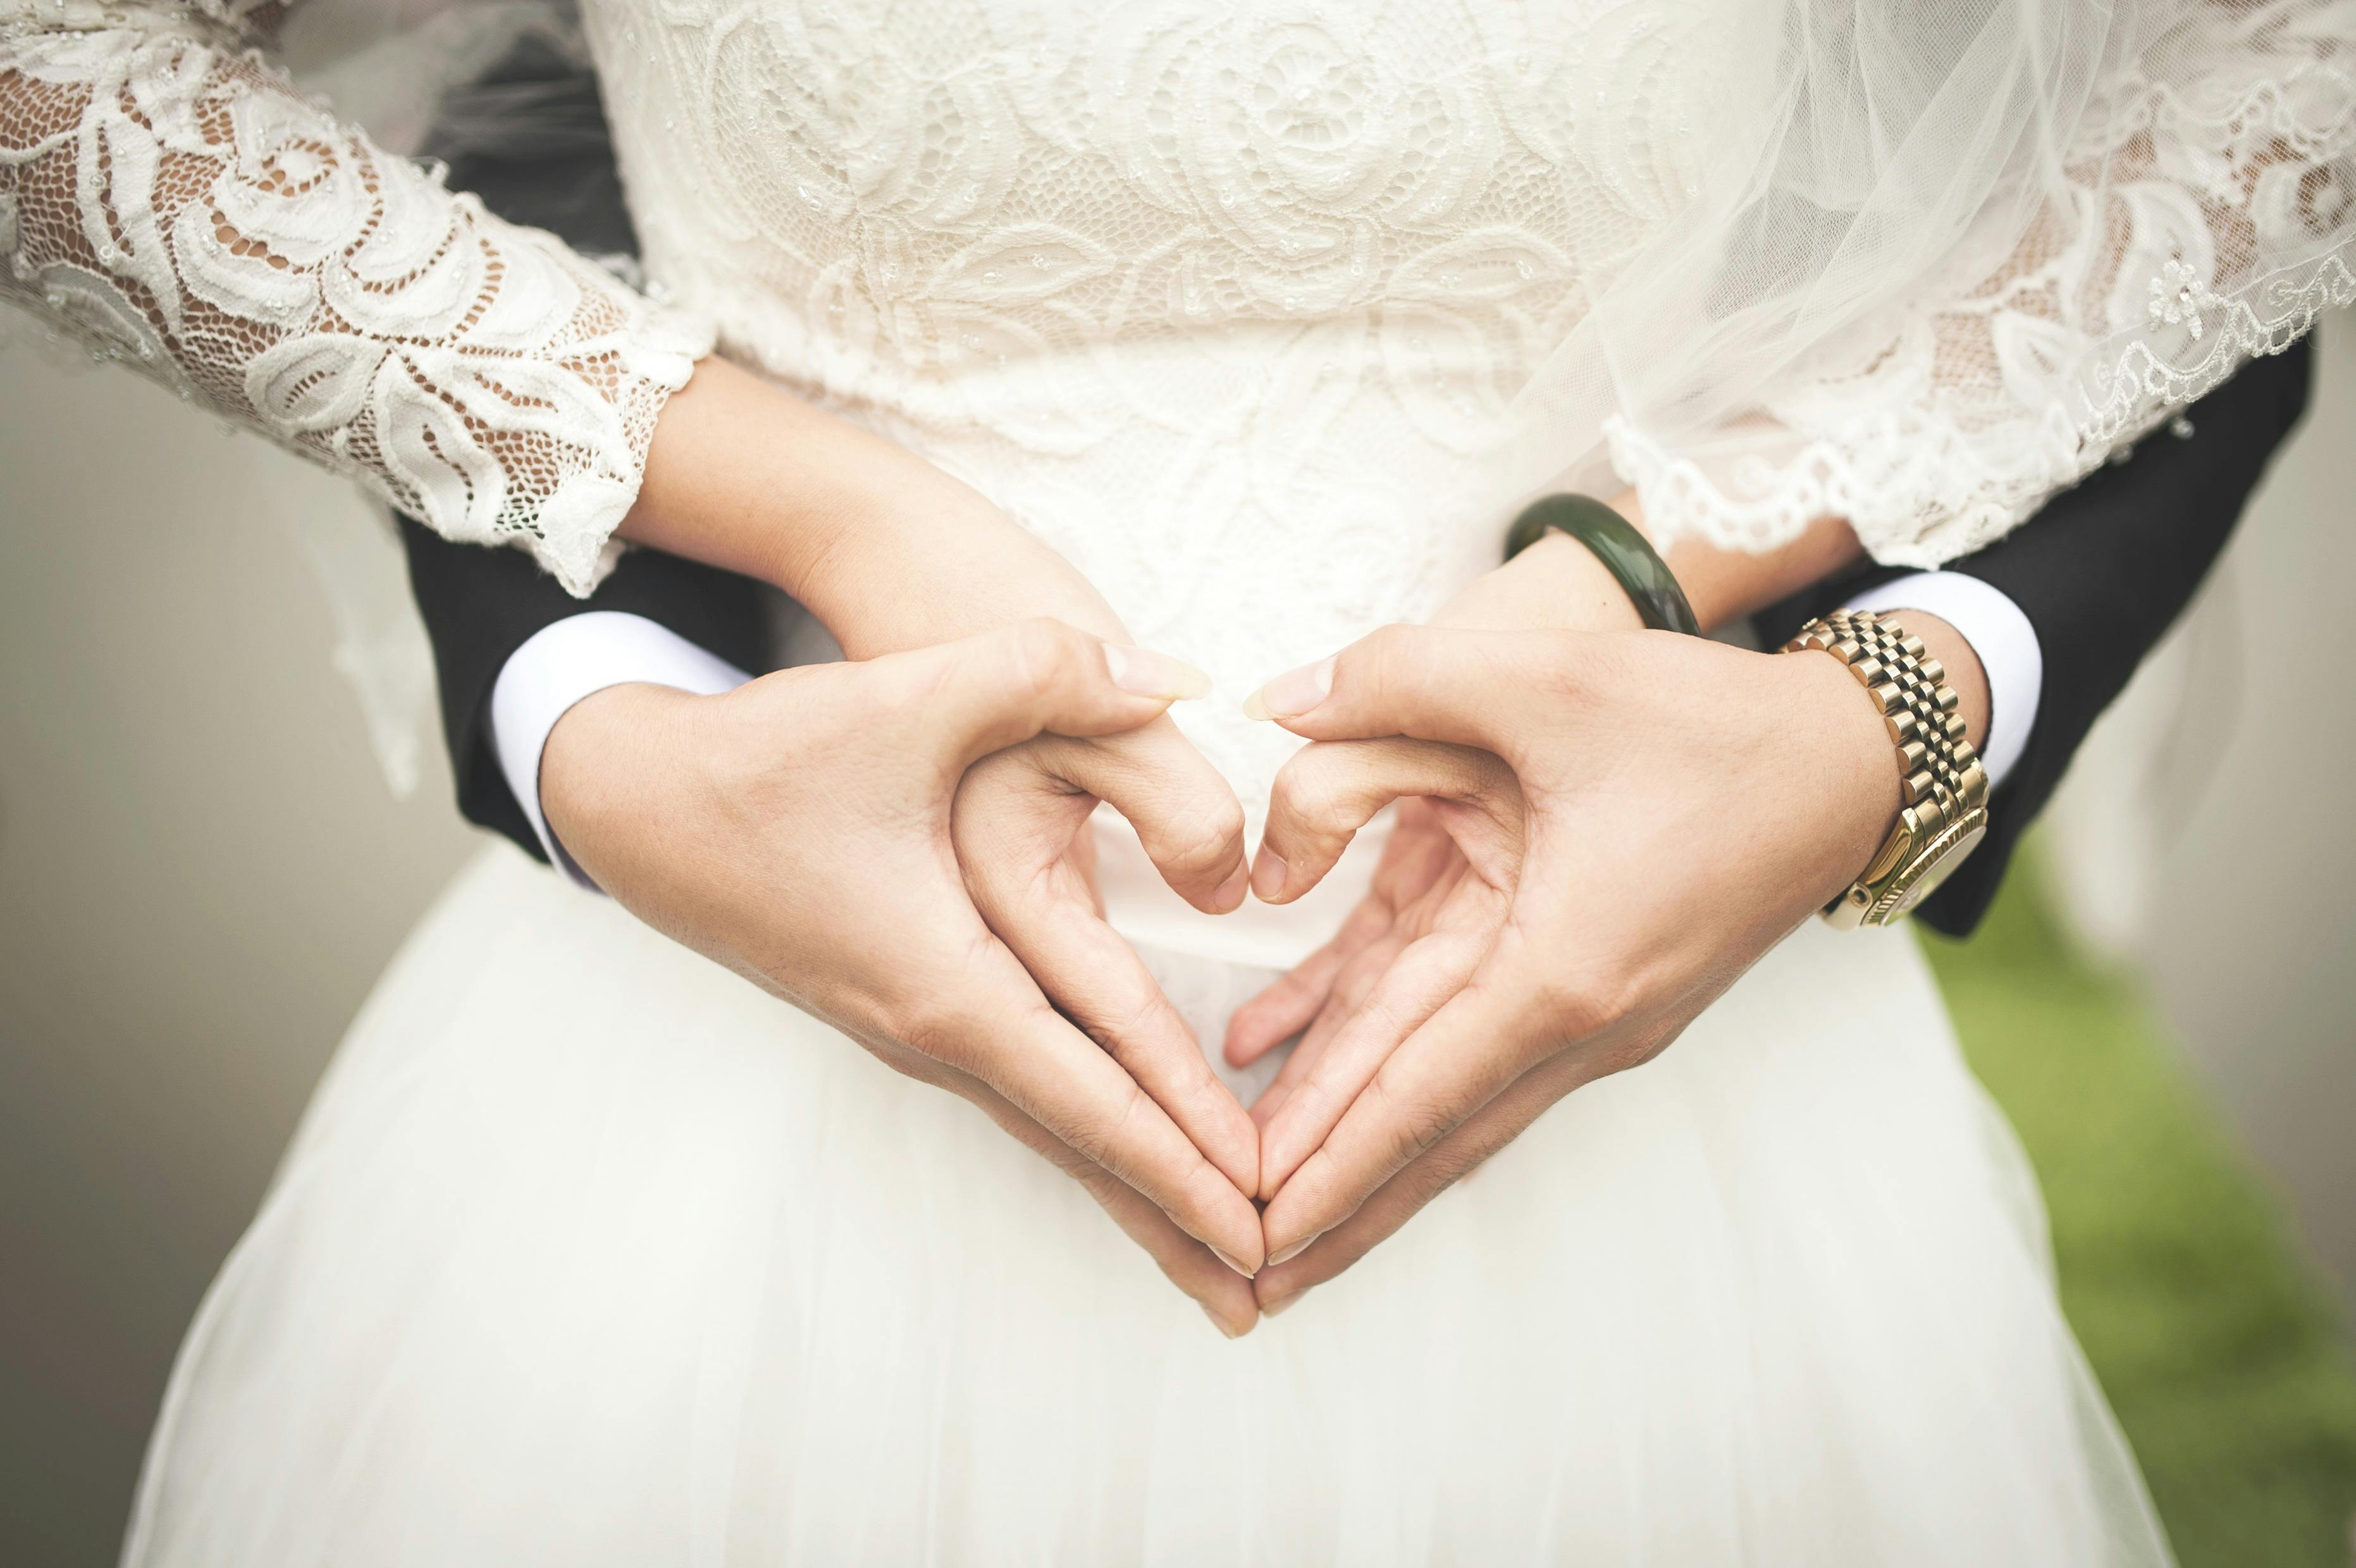 Man and woman making a heart shape with their hands. | Photo: Pexels